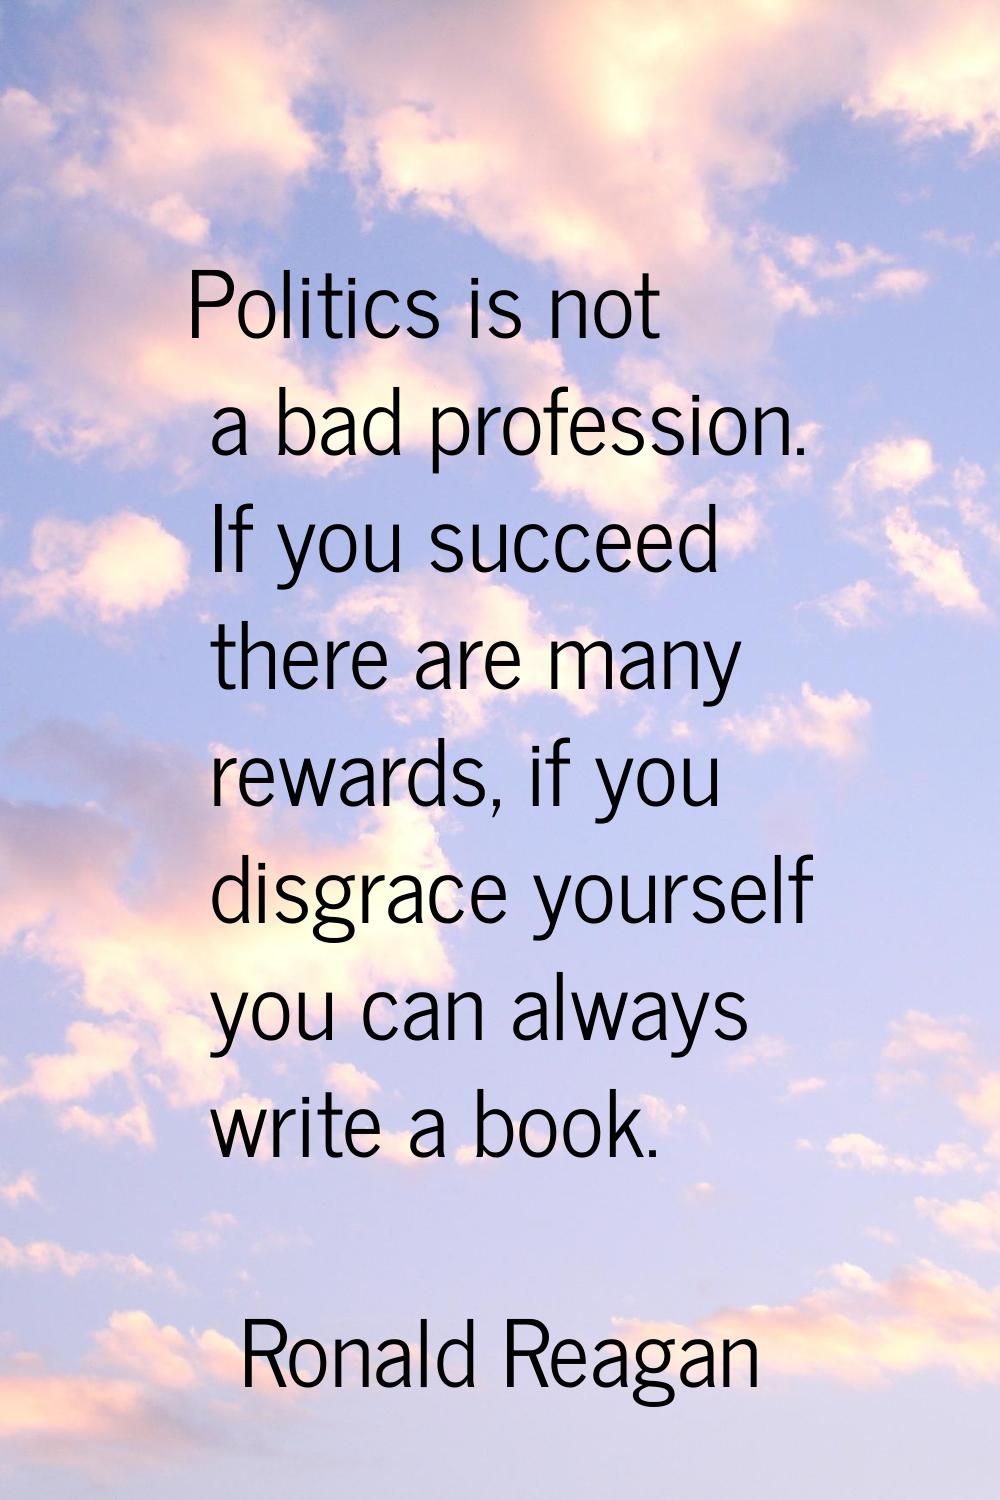 Politics is not a bad profession. If you succeed there are many rewards, if you disgrace yourself y